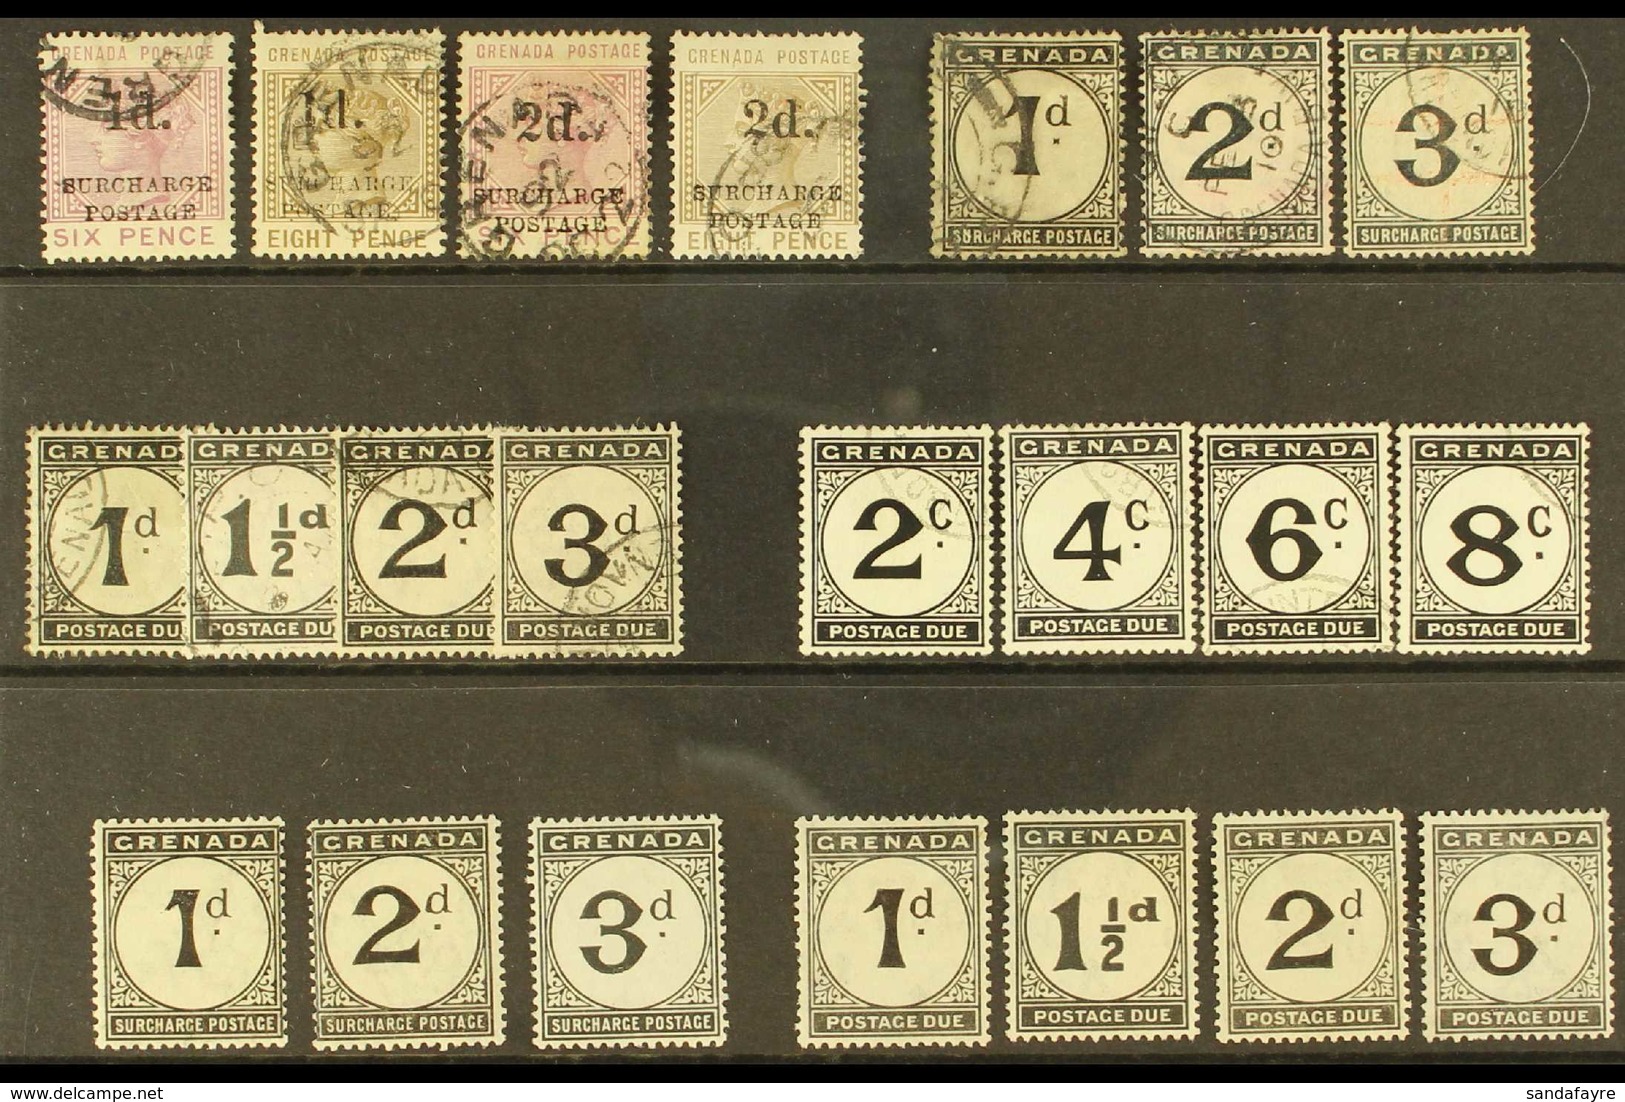 POSTAGE DUES 1892 - 1952 Mint And Used Collection With 1906 Set Mint, 1921 Set Mint, And 1892 Surcharges To 1952 (SG D4/ - Grenade (...-1974)